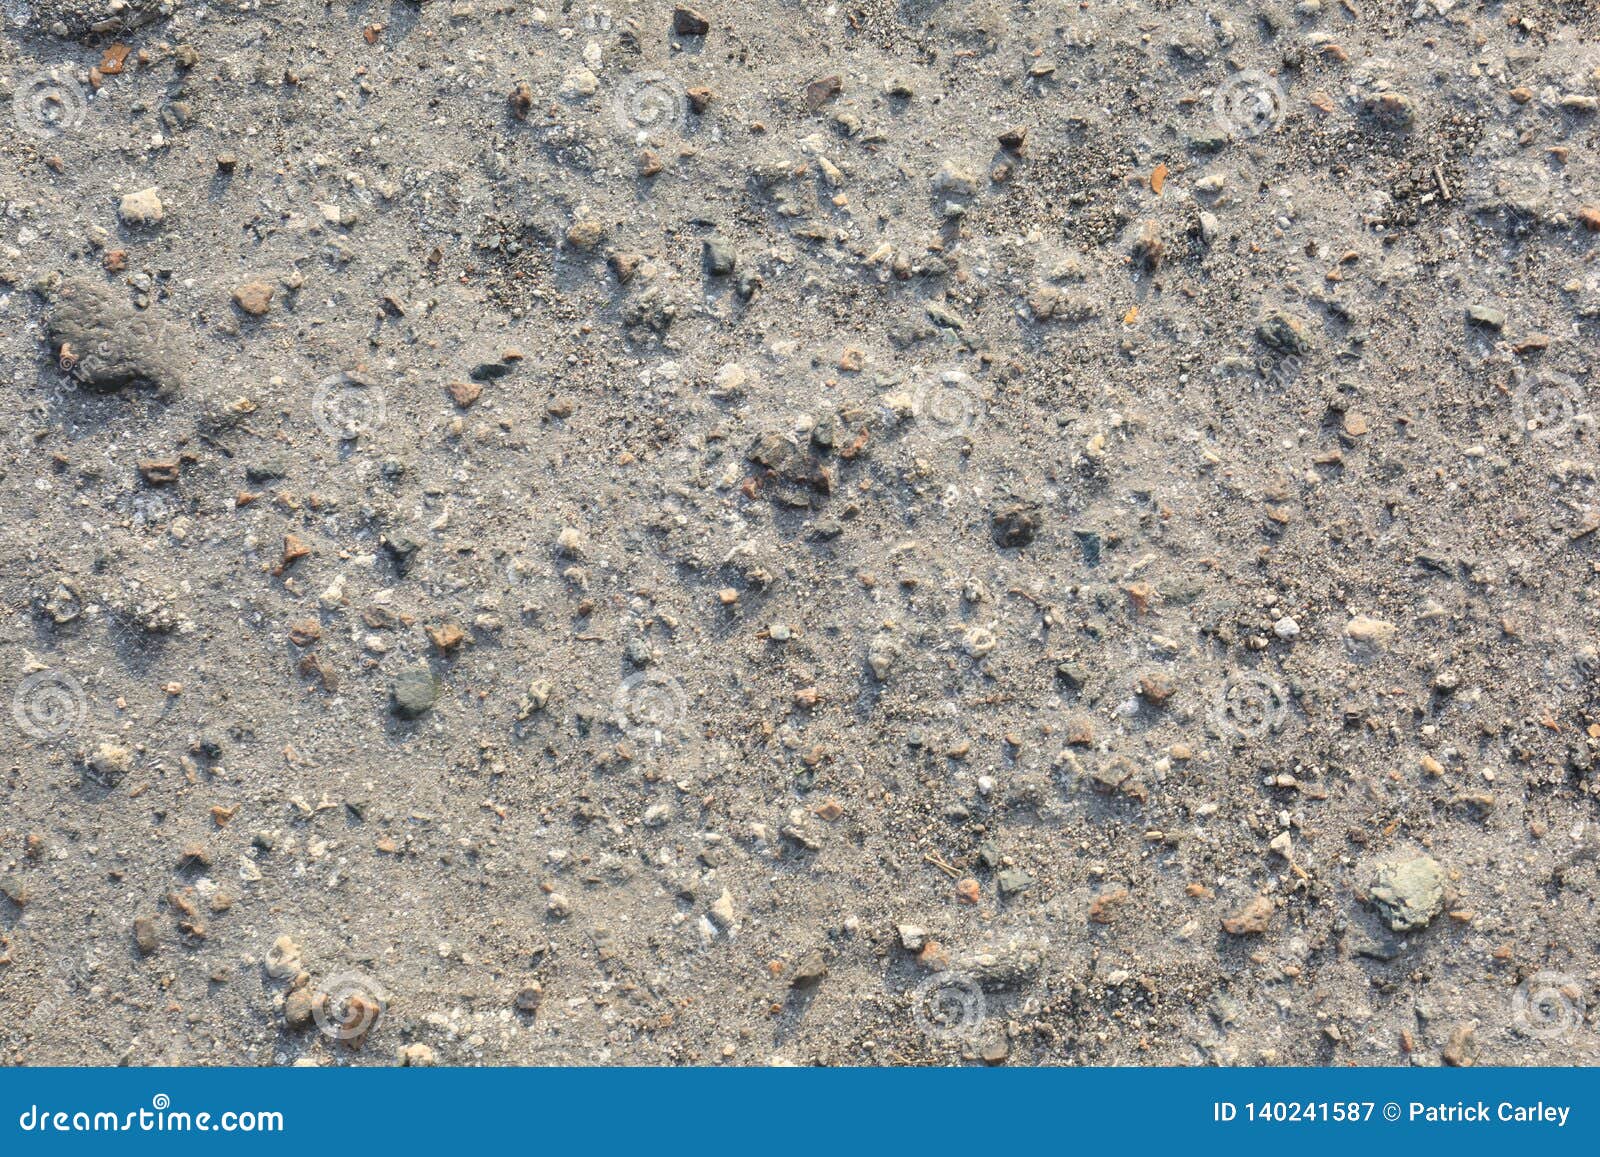 Stone and Sand Texture Close Up Mimicking the Moon Stock Image - Image ...